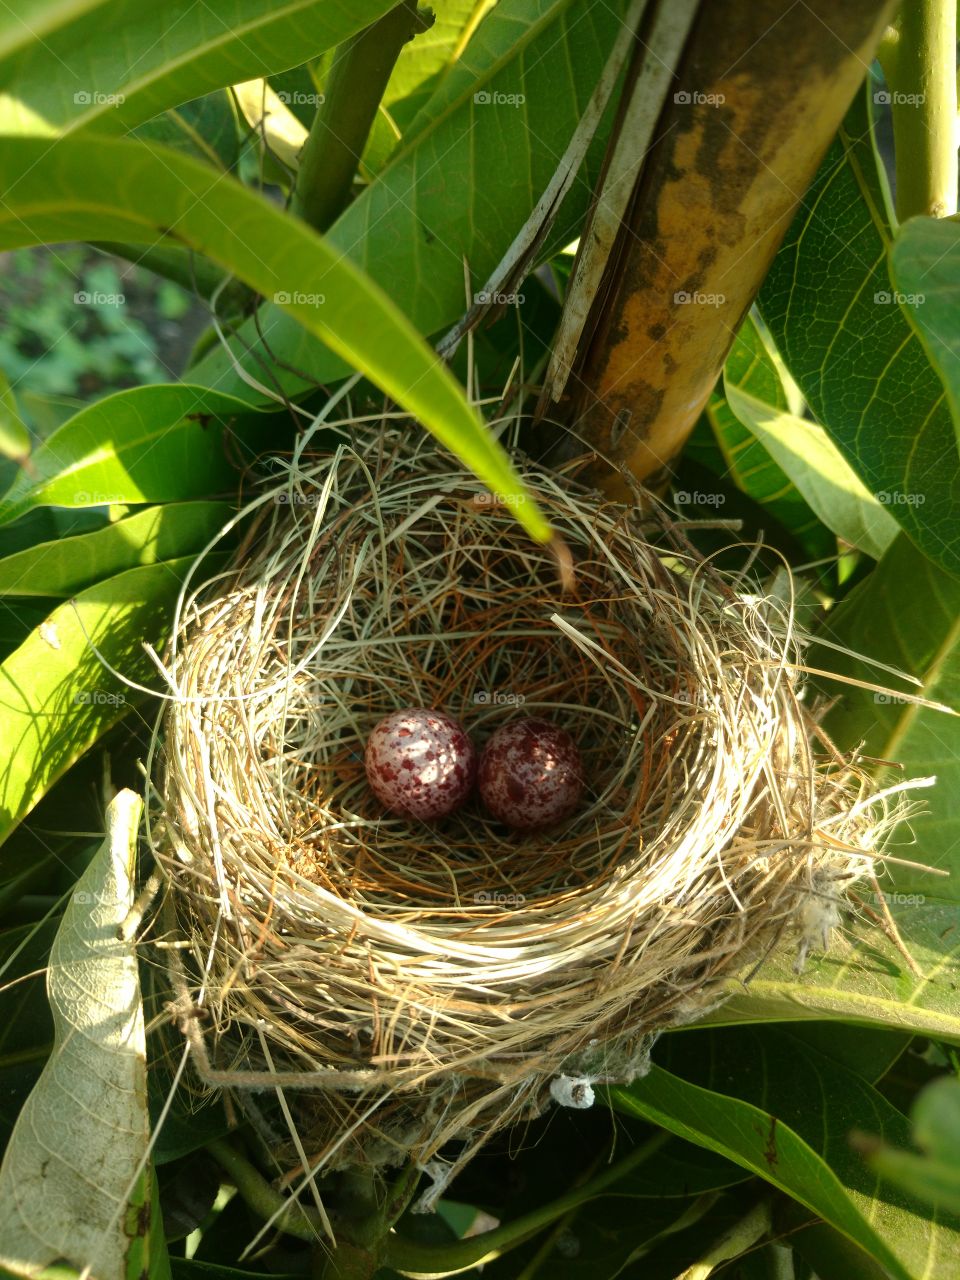 NEST. Bird's Beautiful Nest On The Tree In My Farm, two little eggs too in it.